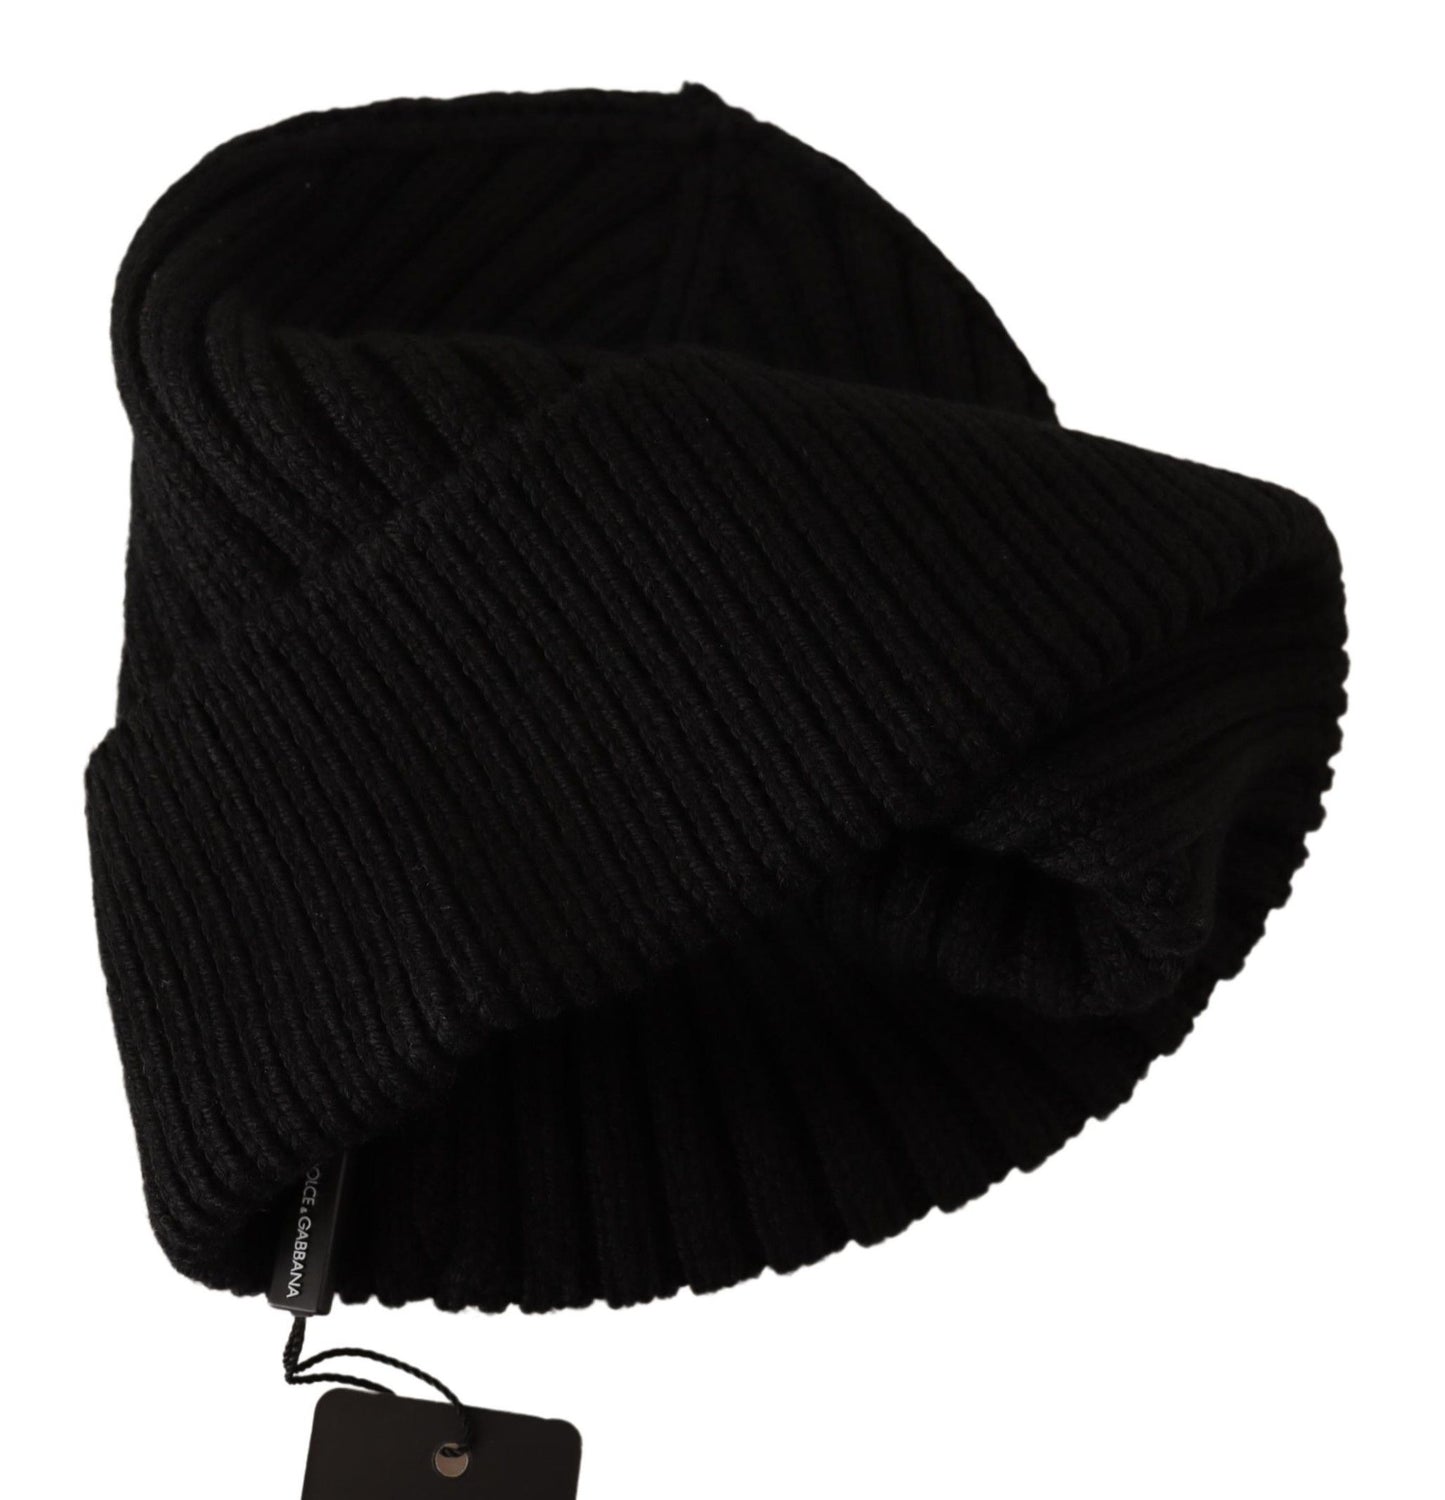 Dolce & Gabbana Elegant Cable Knit Wool Beanie with Fleece Liner